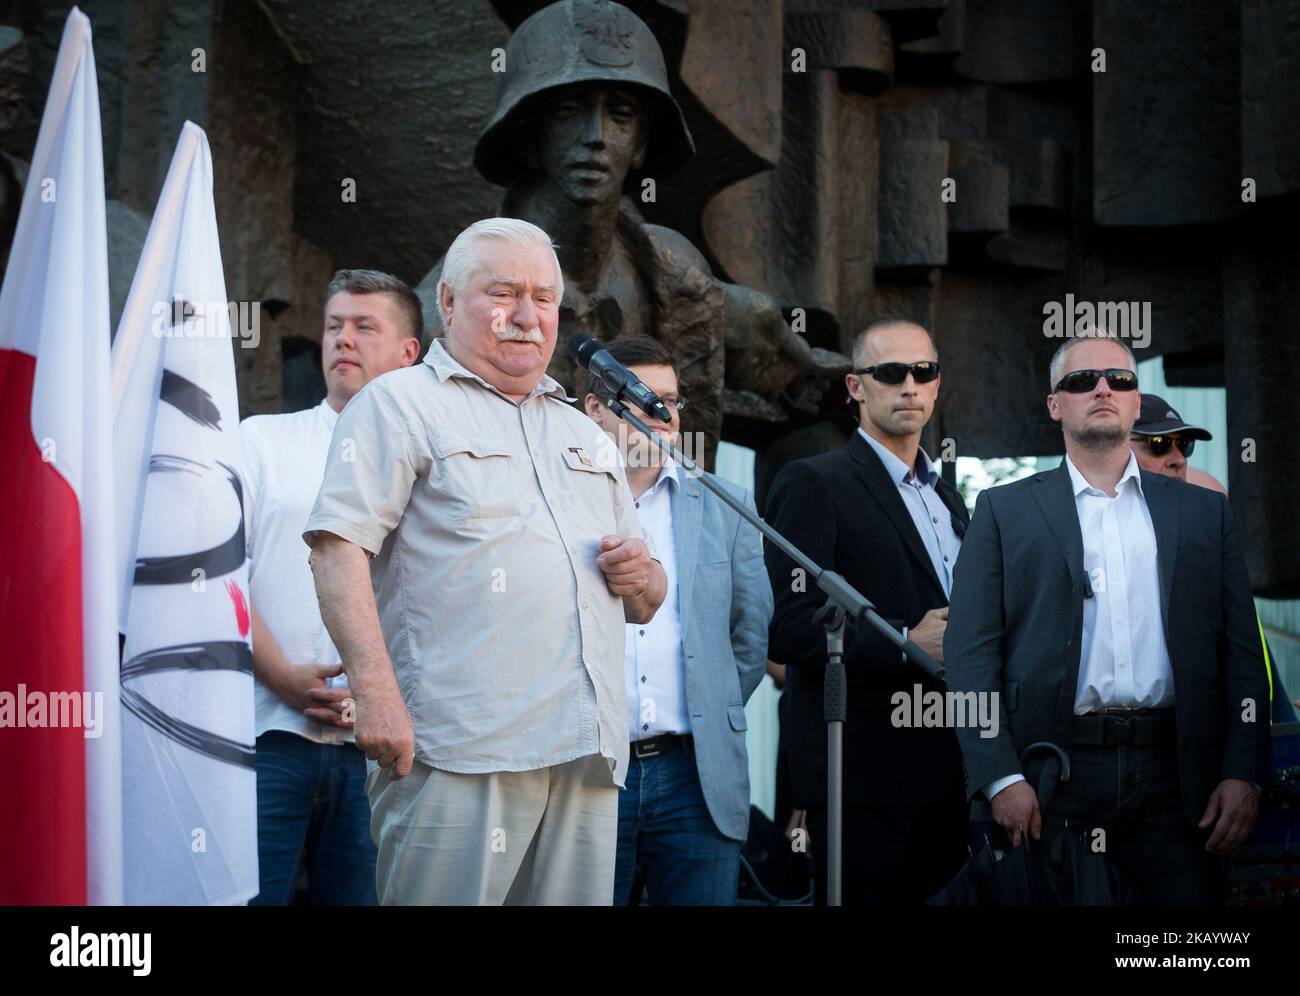 Polish former president and Nobel Peace Prize winner Lech Walesa addresses a crowd of right-wing government opponents during the protest in front of the Sad Najwyzszy, (the Polish Supreme Court) in Warsaw, Poland on 4 July 2018. Poland’s international isolation and political uncertainty at home has deepened as a purge of the Supreme Court’s justices took effect, with the chief justice defiantly refusing to step down. First President Malgorzata Gersdorf arrived for work as usual at the court in Warsaw, vowing to continue her constitutionally mandated term, which runs through 2020. (Photo by Mat Stock Photo